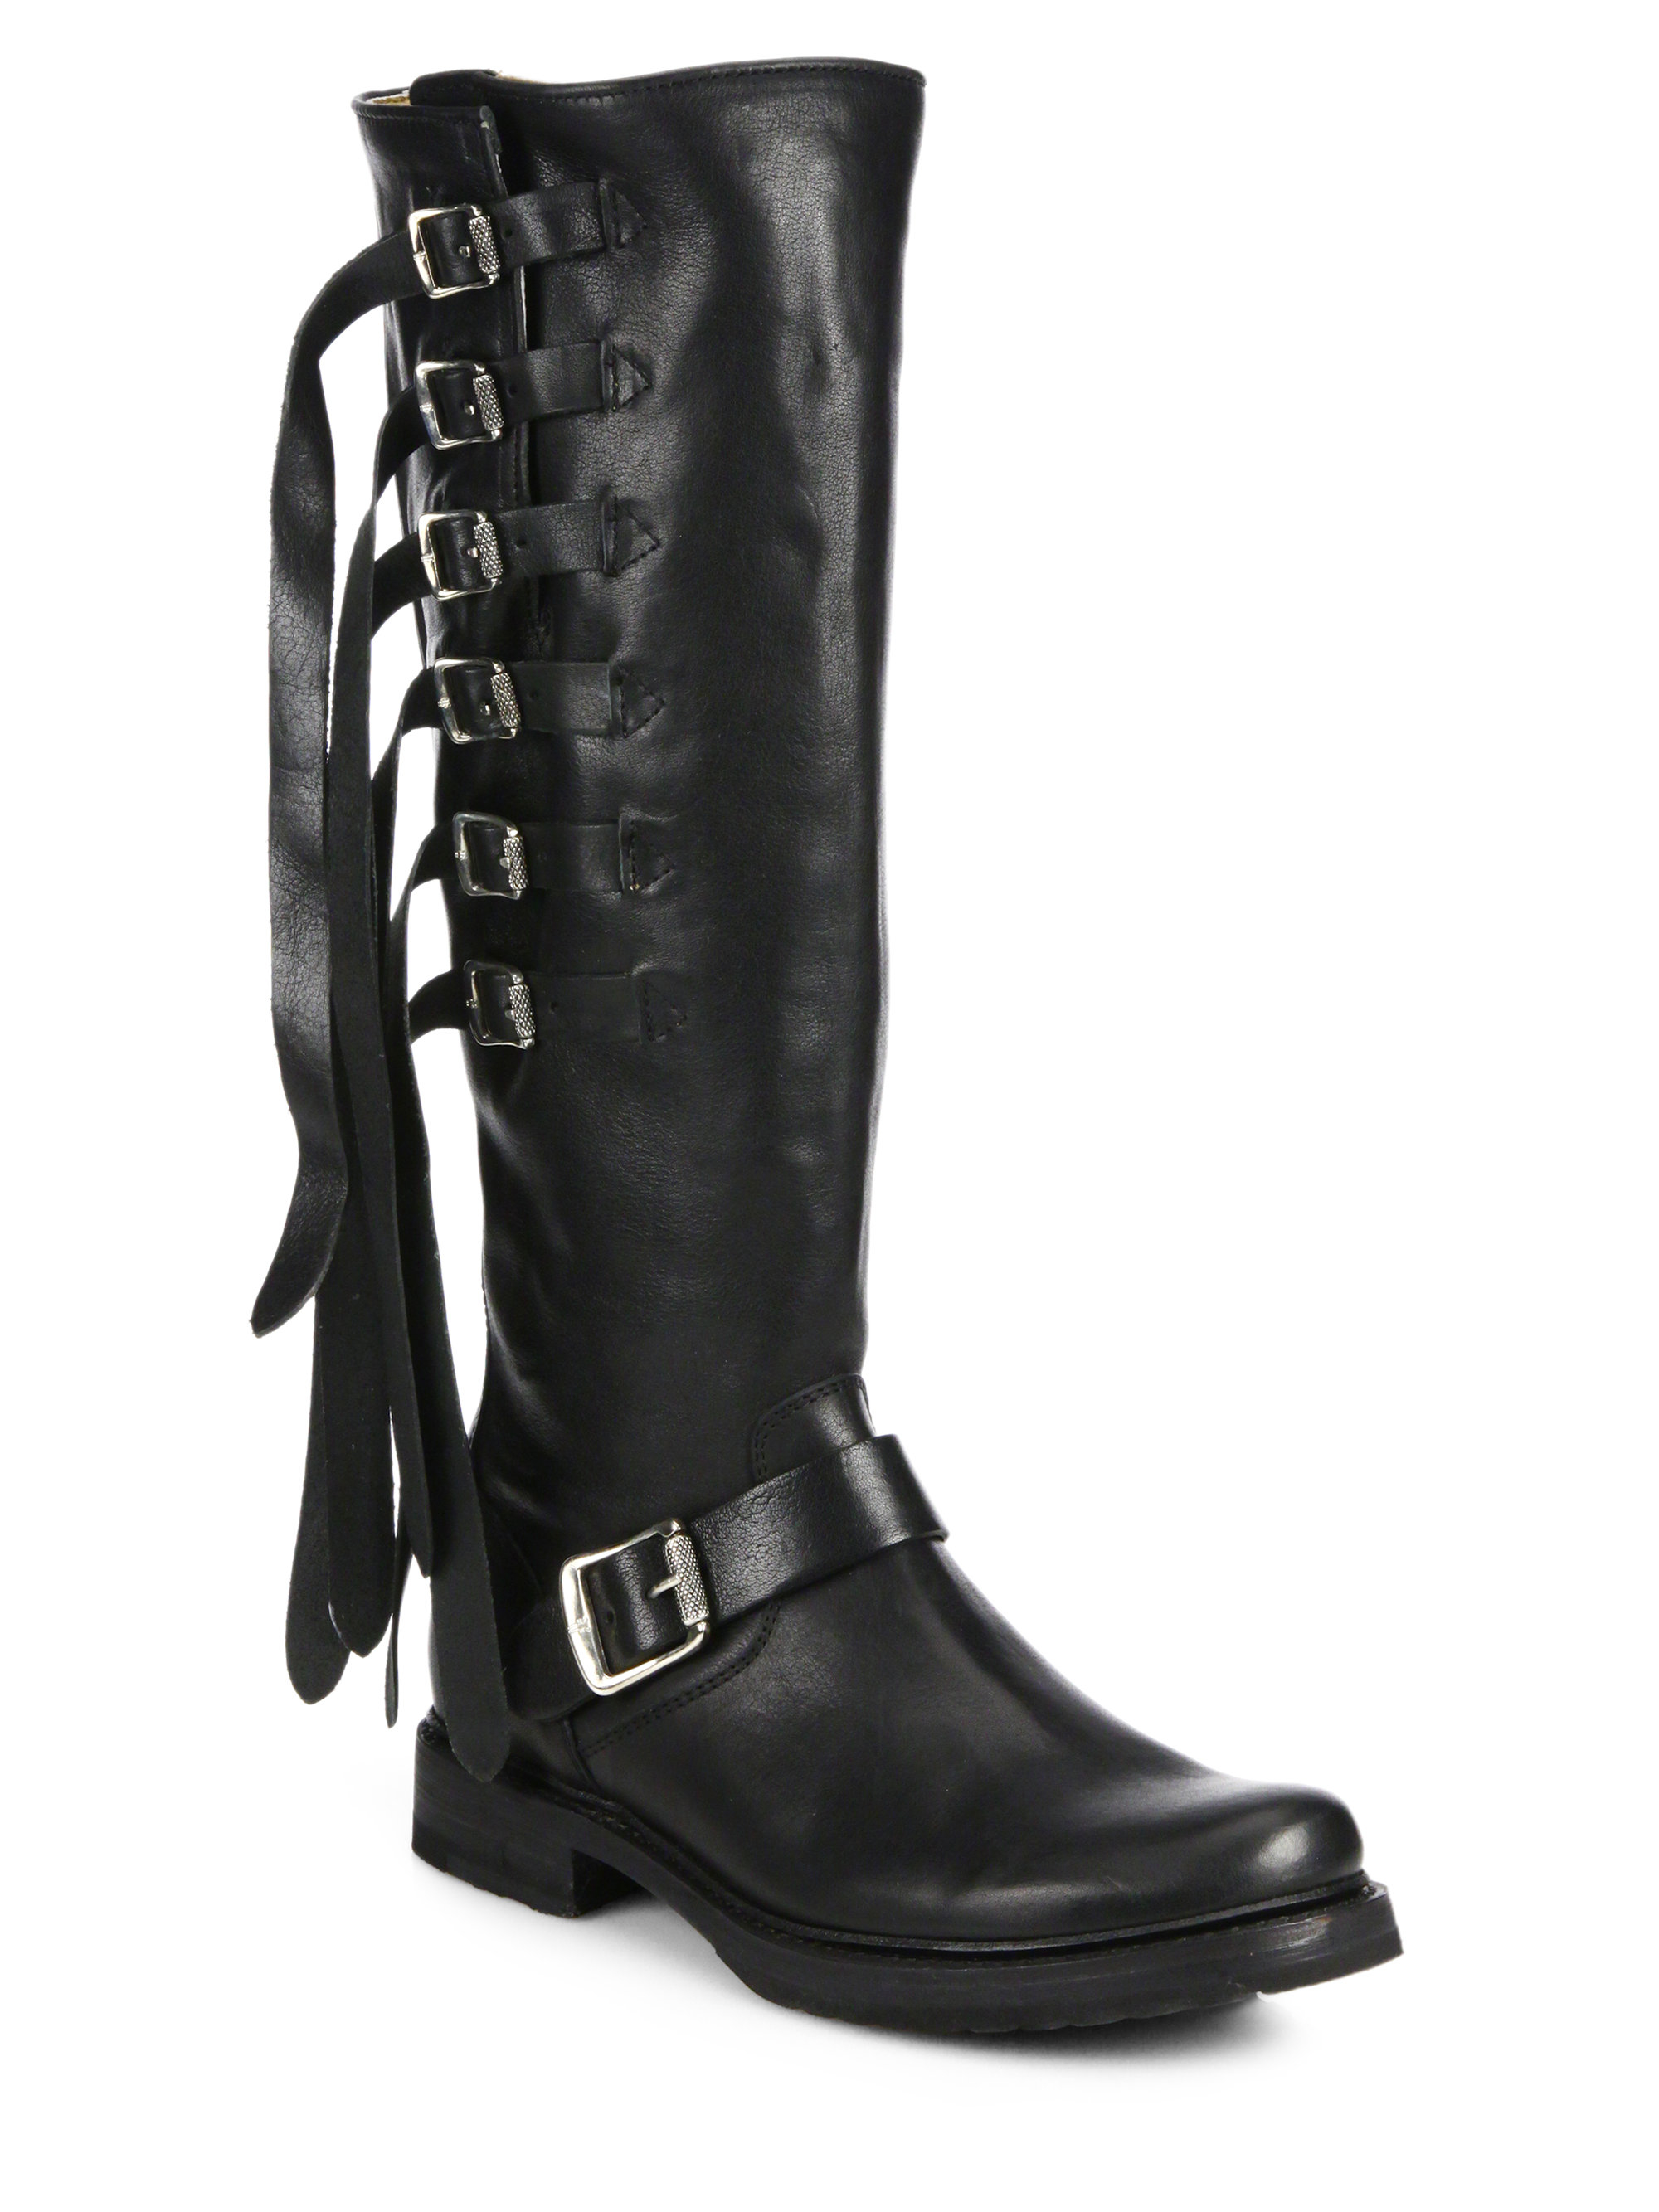 Lyst - Frye Veronica Strappy Buckled Leather Knee-high Boots in Black